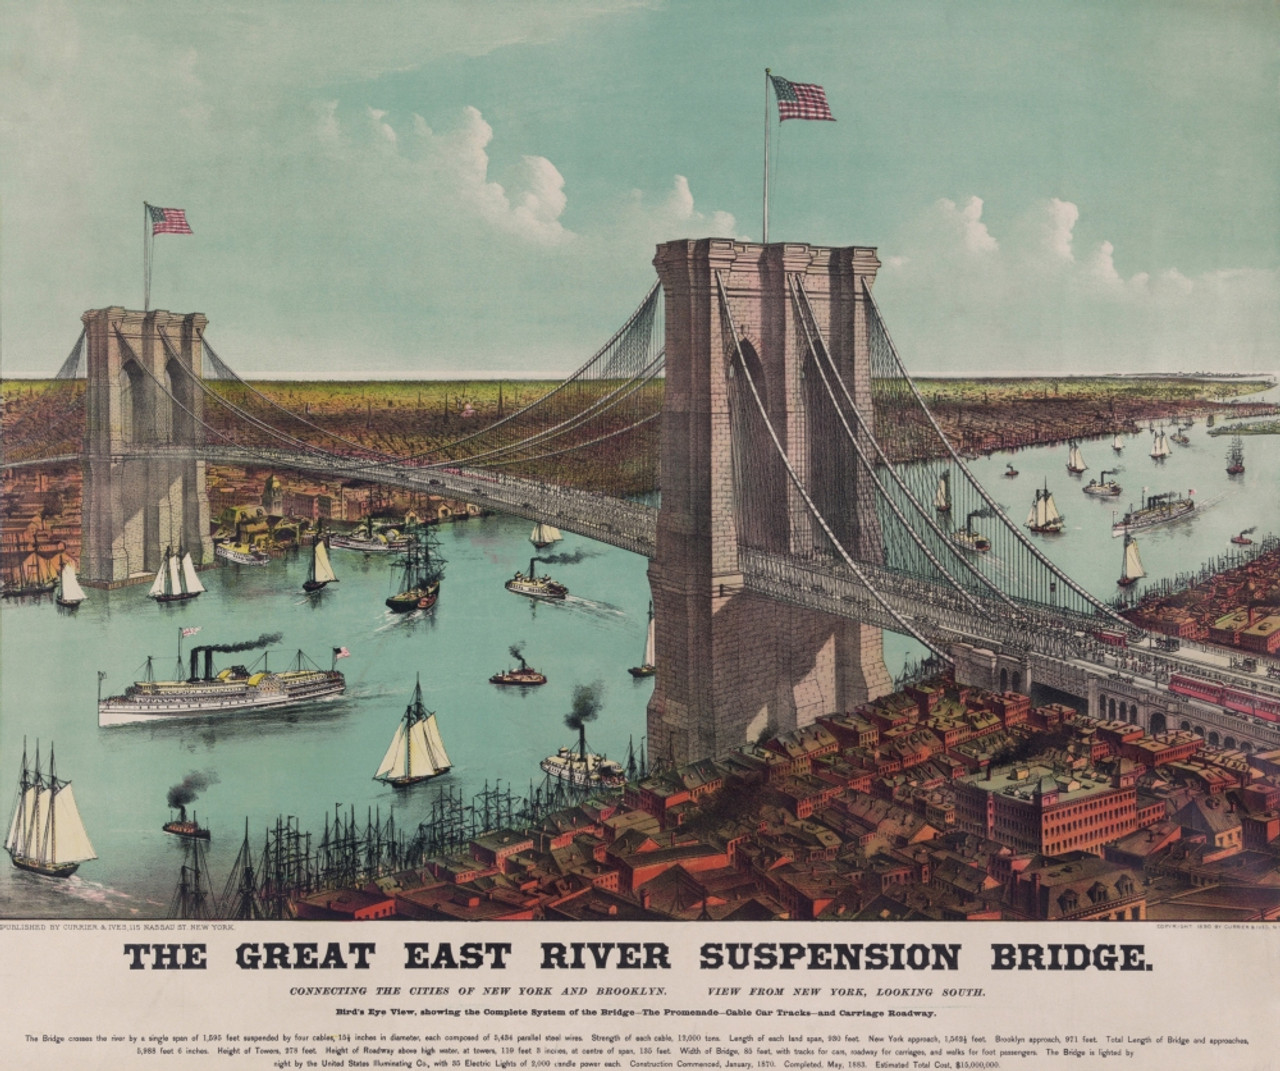 The Brooklyn Lc-Dig-Pga-03206 And Viewed Looking Currier The - Brooklyn Car - Toward Manhattan Tracks From By Chromolithograph 1890 Item Showing History Carriage Ives. Roadway. # Bridge Promenade Posterazzi VAREVCHISL023EC020 Cable South